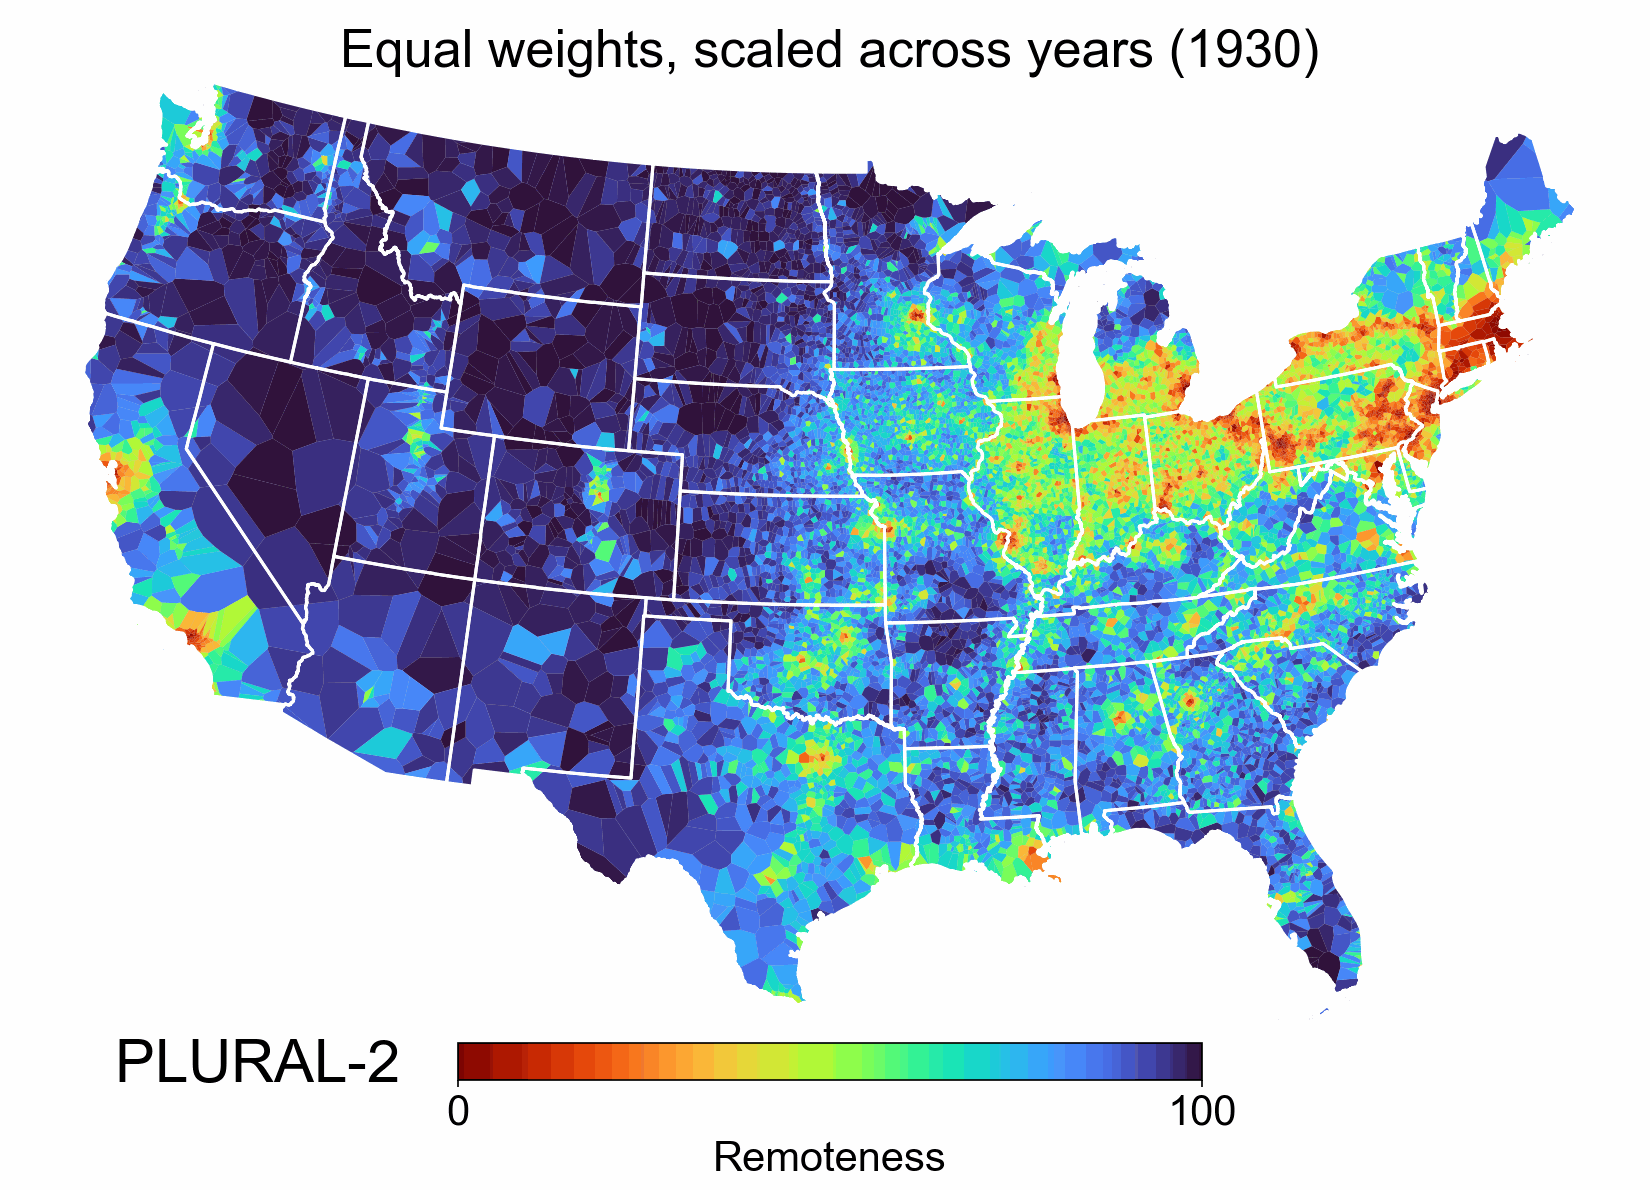 inv750ms_PLURAL_2_scaled_across_years_equal_weights.gif